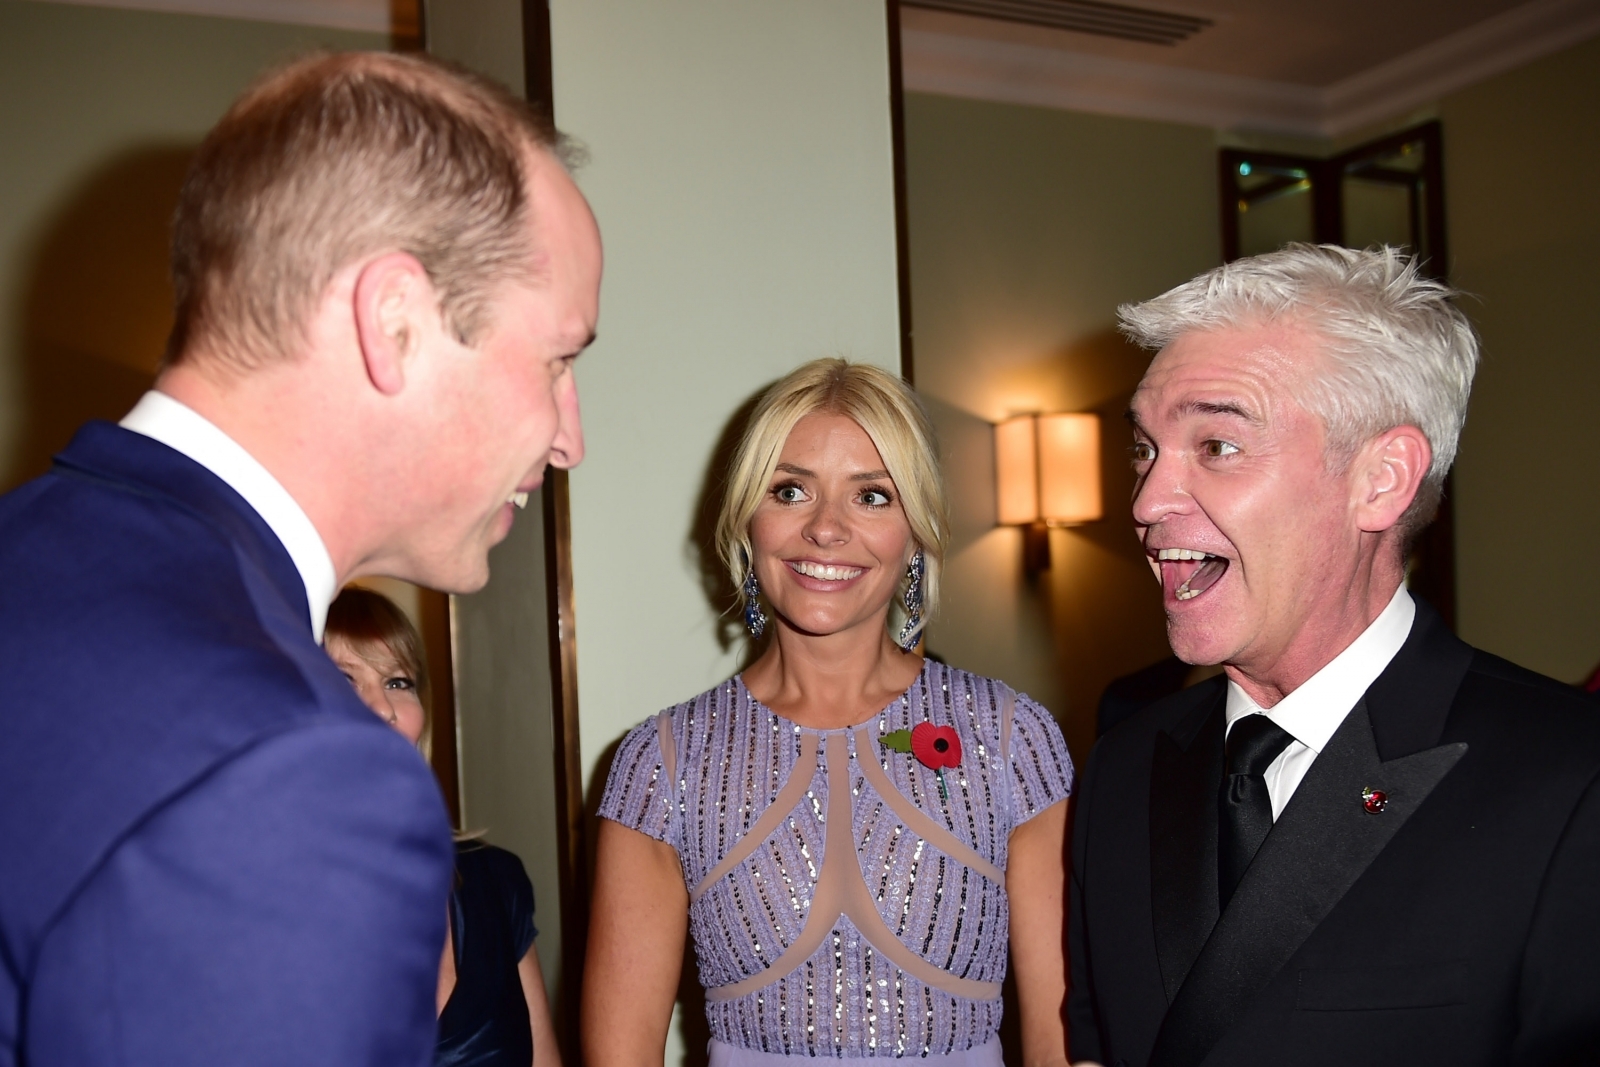 Starstruck Holly Willoughby beams in Prince William's company in funny Instagram picture1600 x 1067